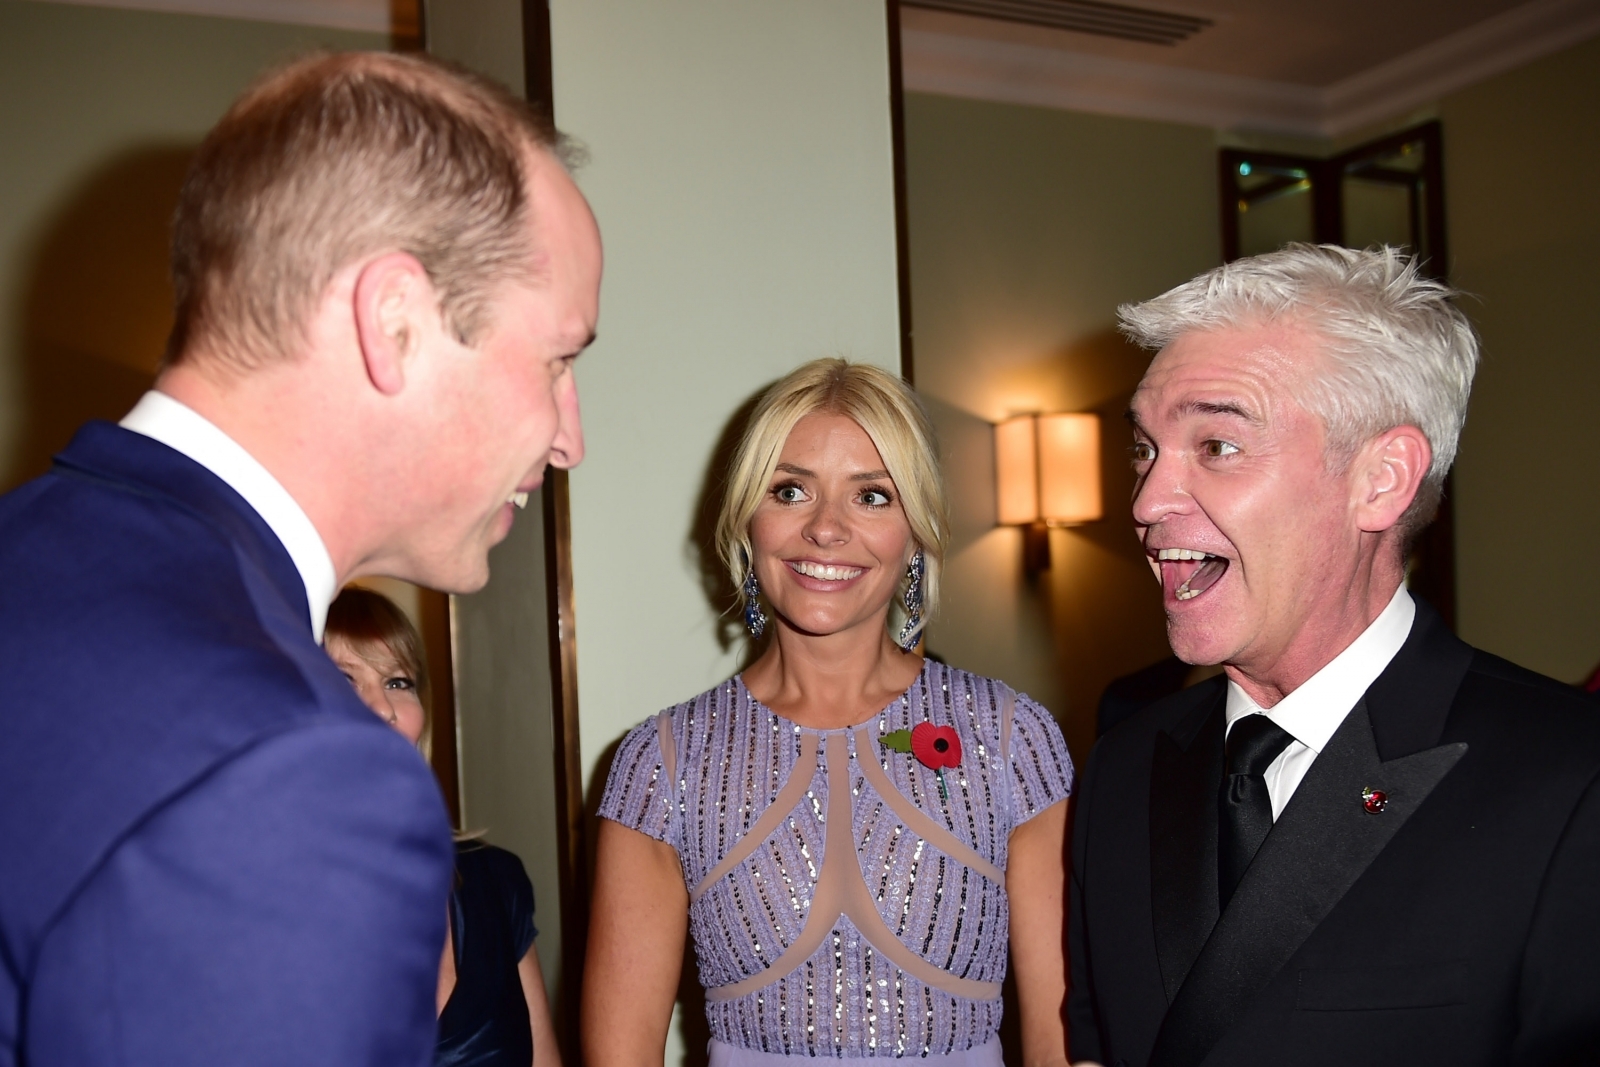 Starstruck Holly Willoughby beams in Prince William's company in funny Instagram picture1600 x 1067